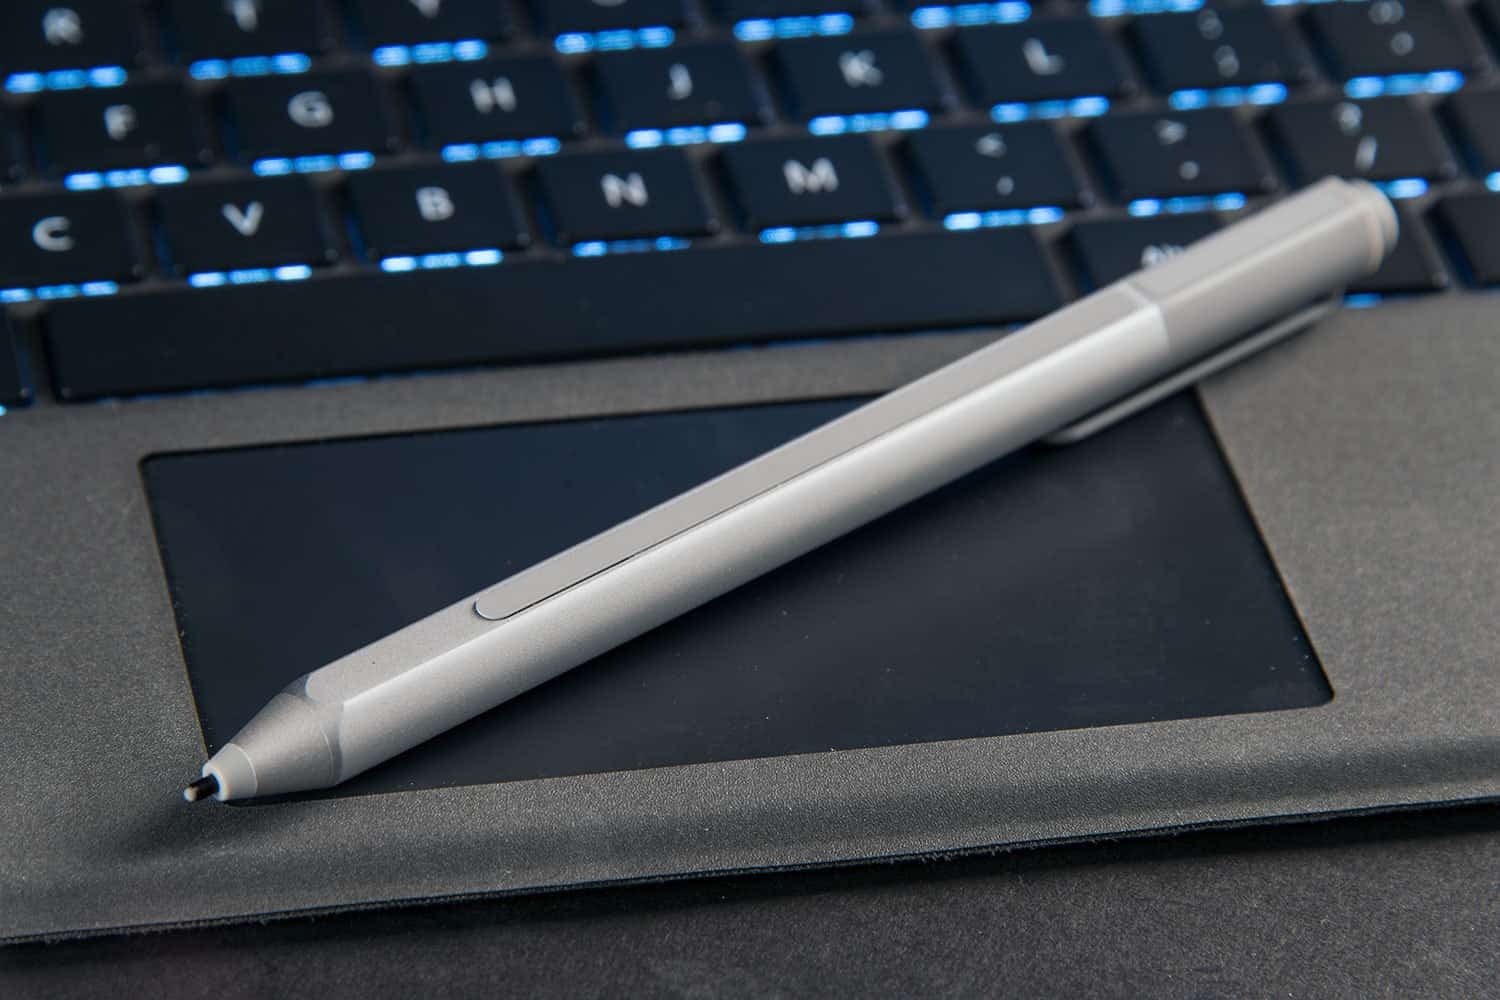 Surface Pen Not Working? Here’s How To Fix It